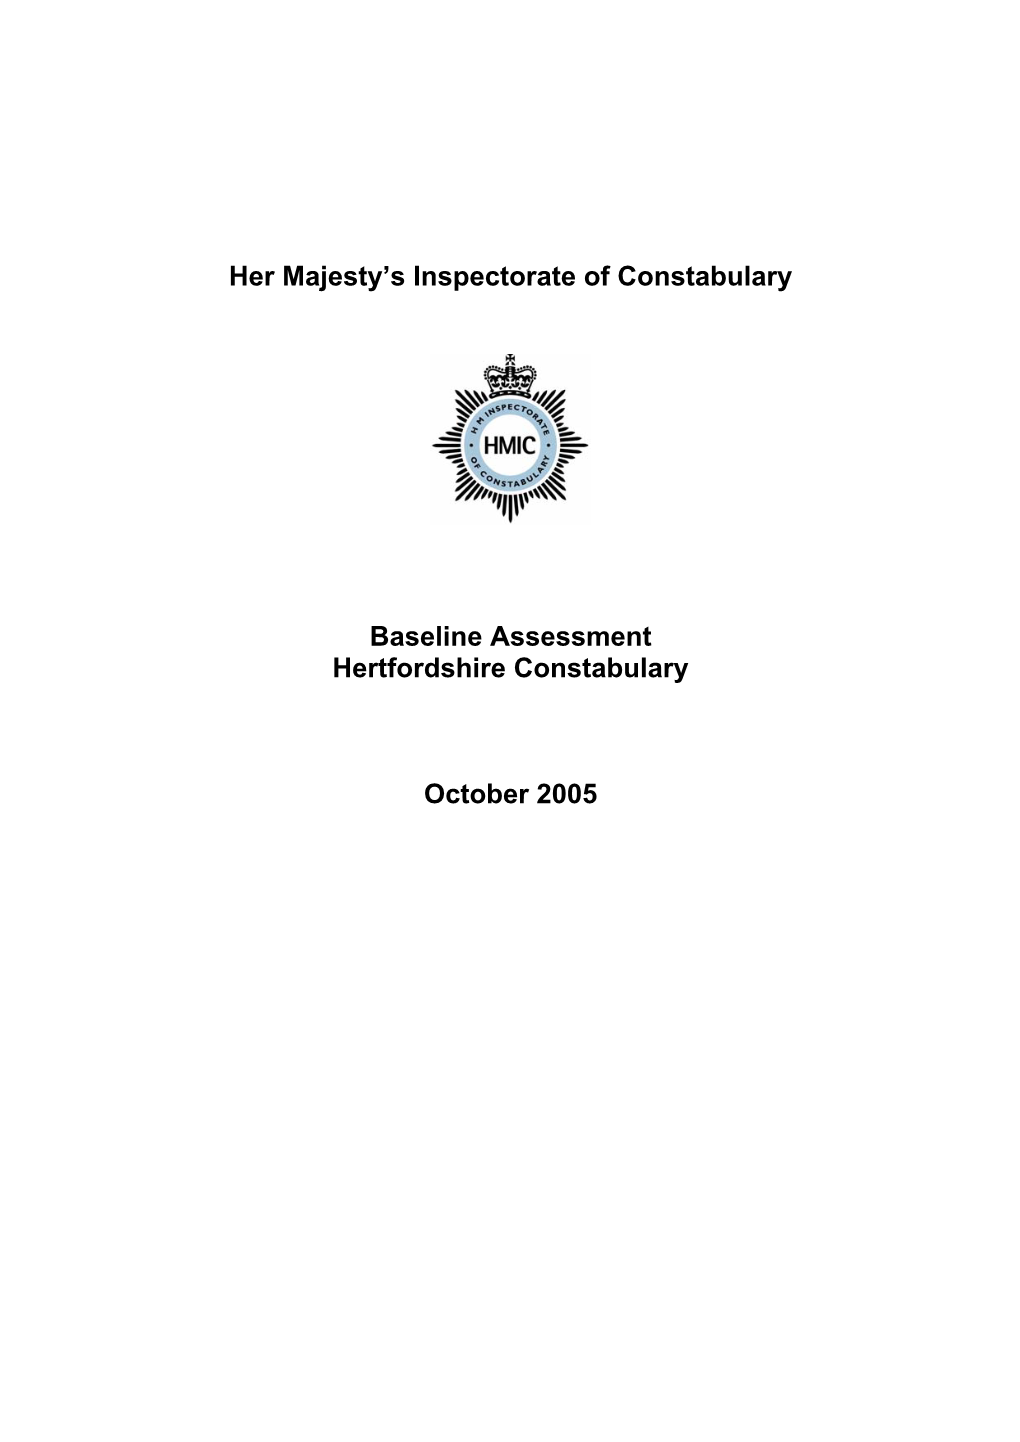 Her Majesty's Inspectorate of Constabulary